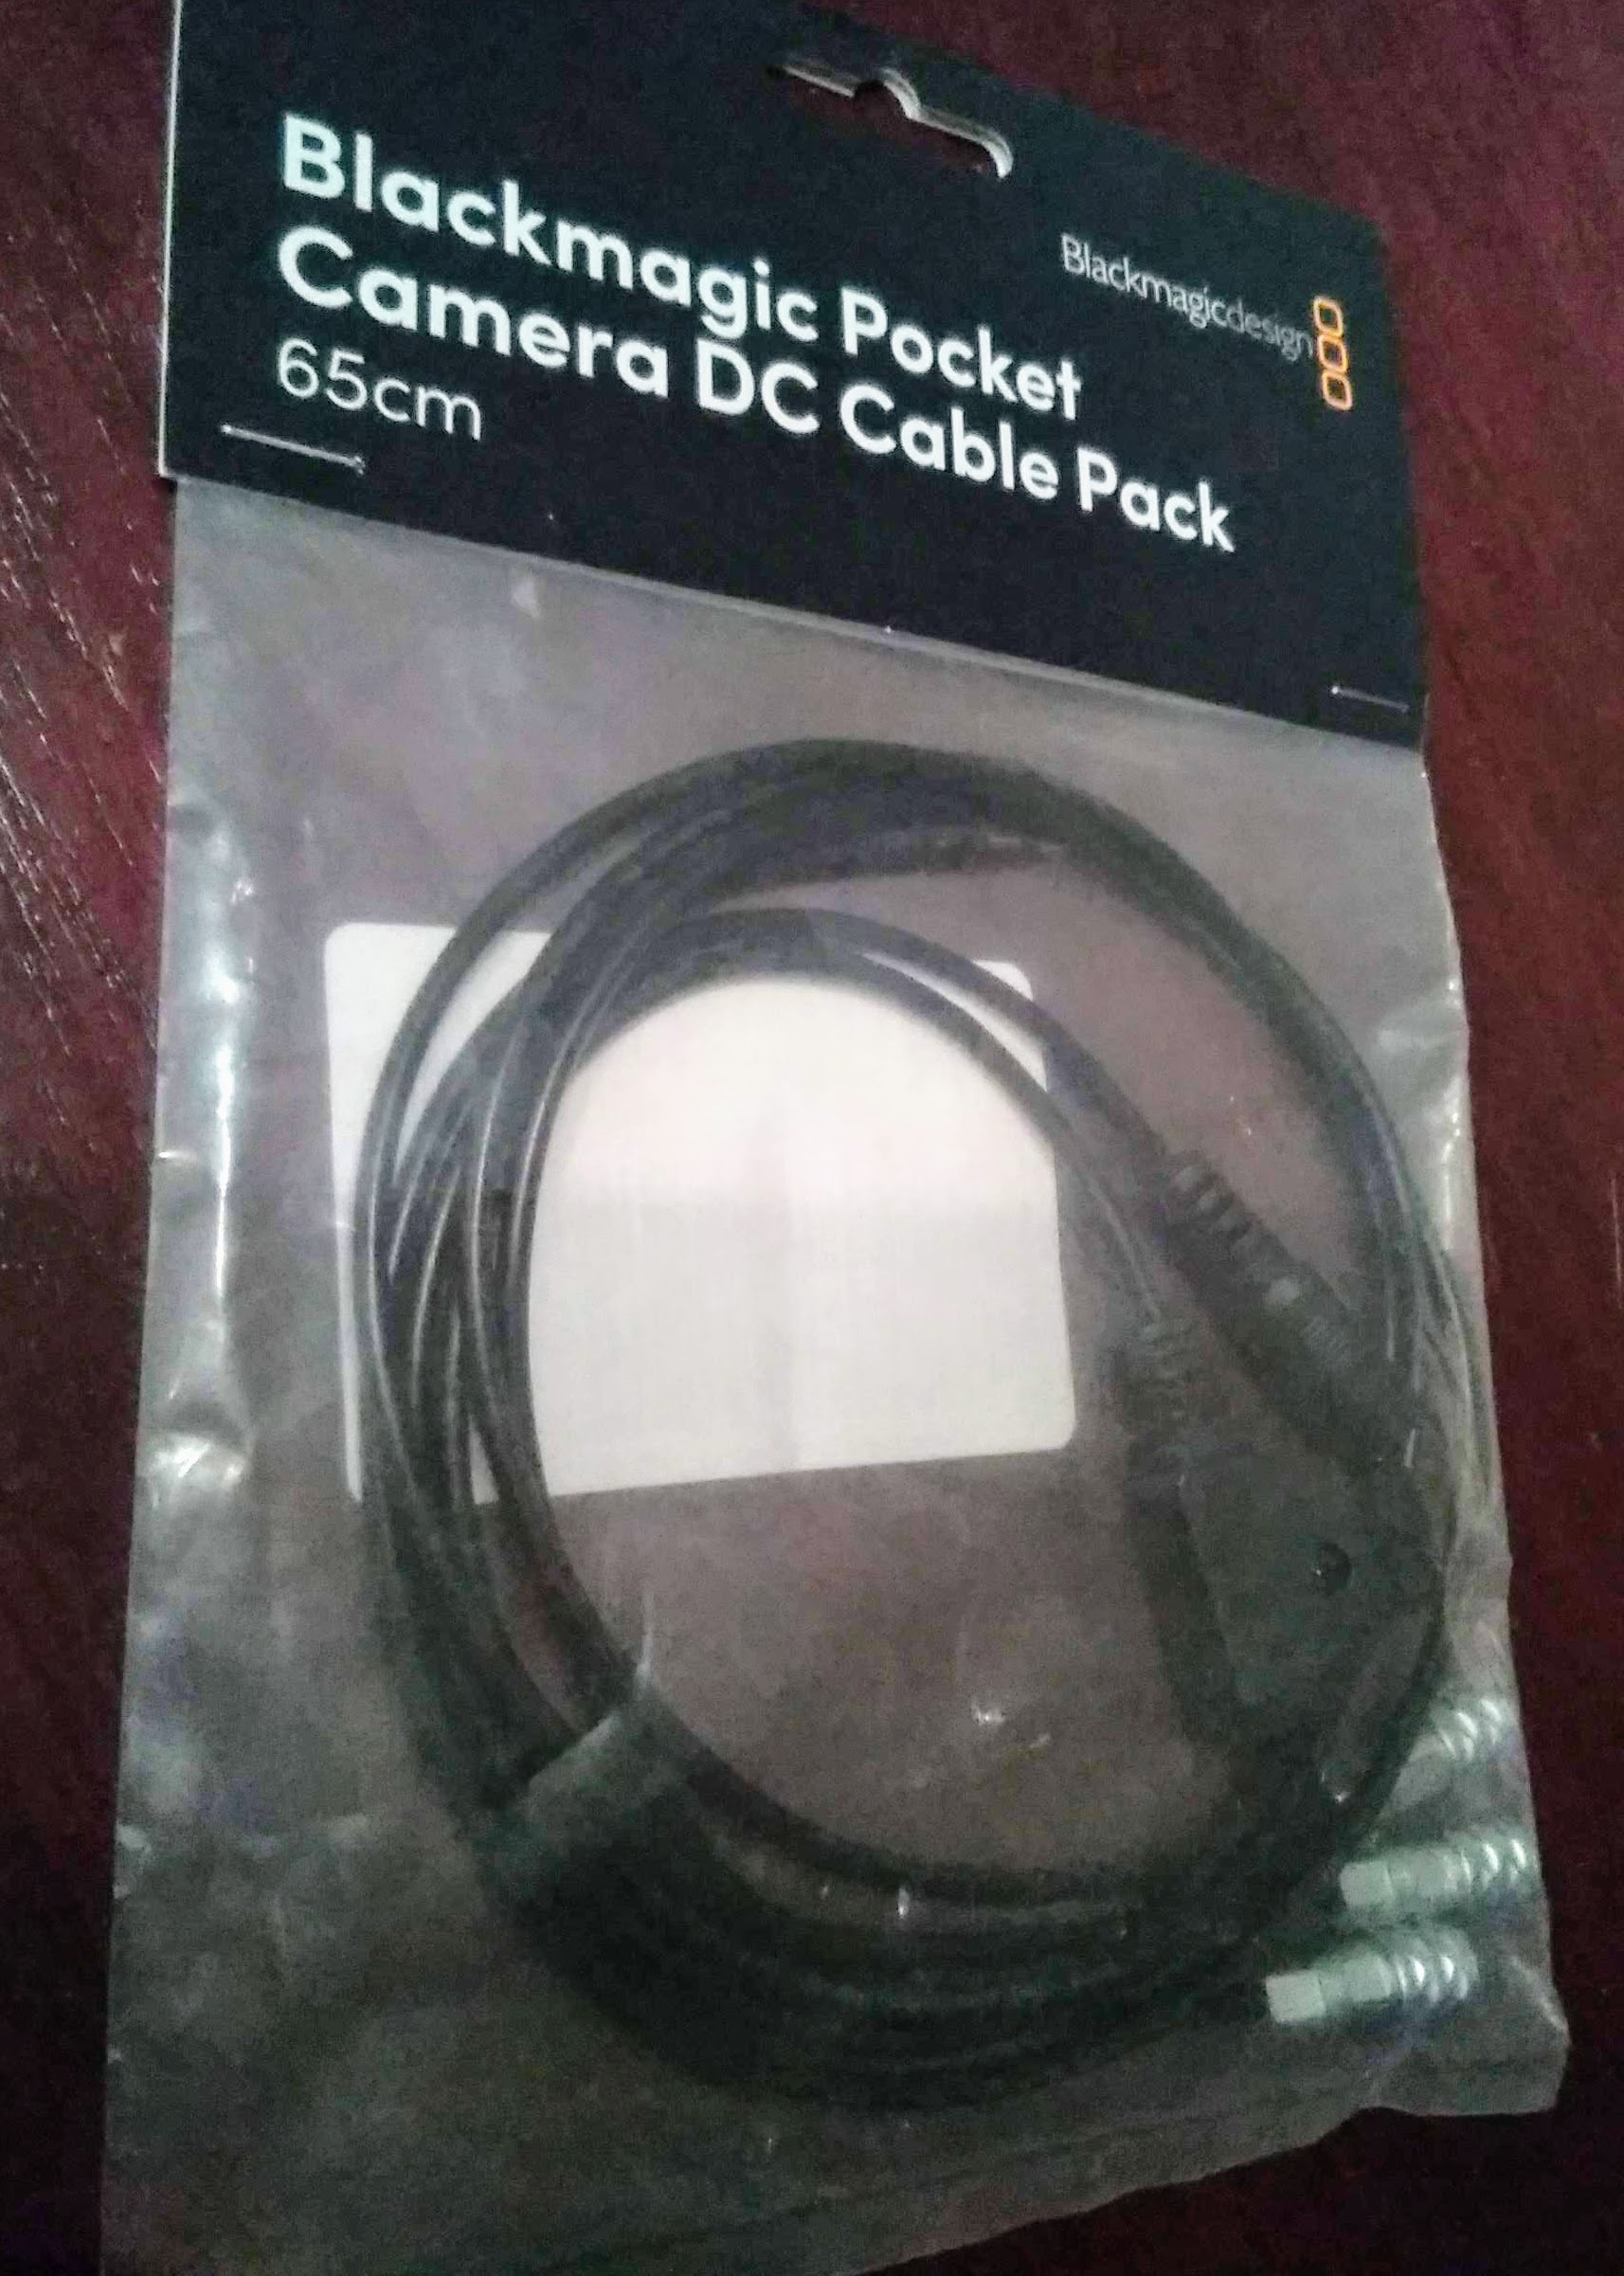 BMPCC4K Cable Pack.jpg